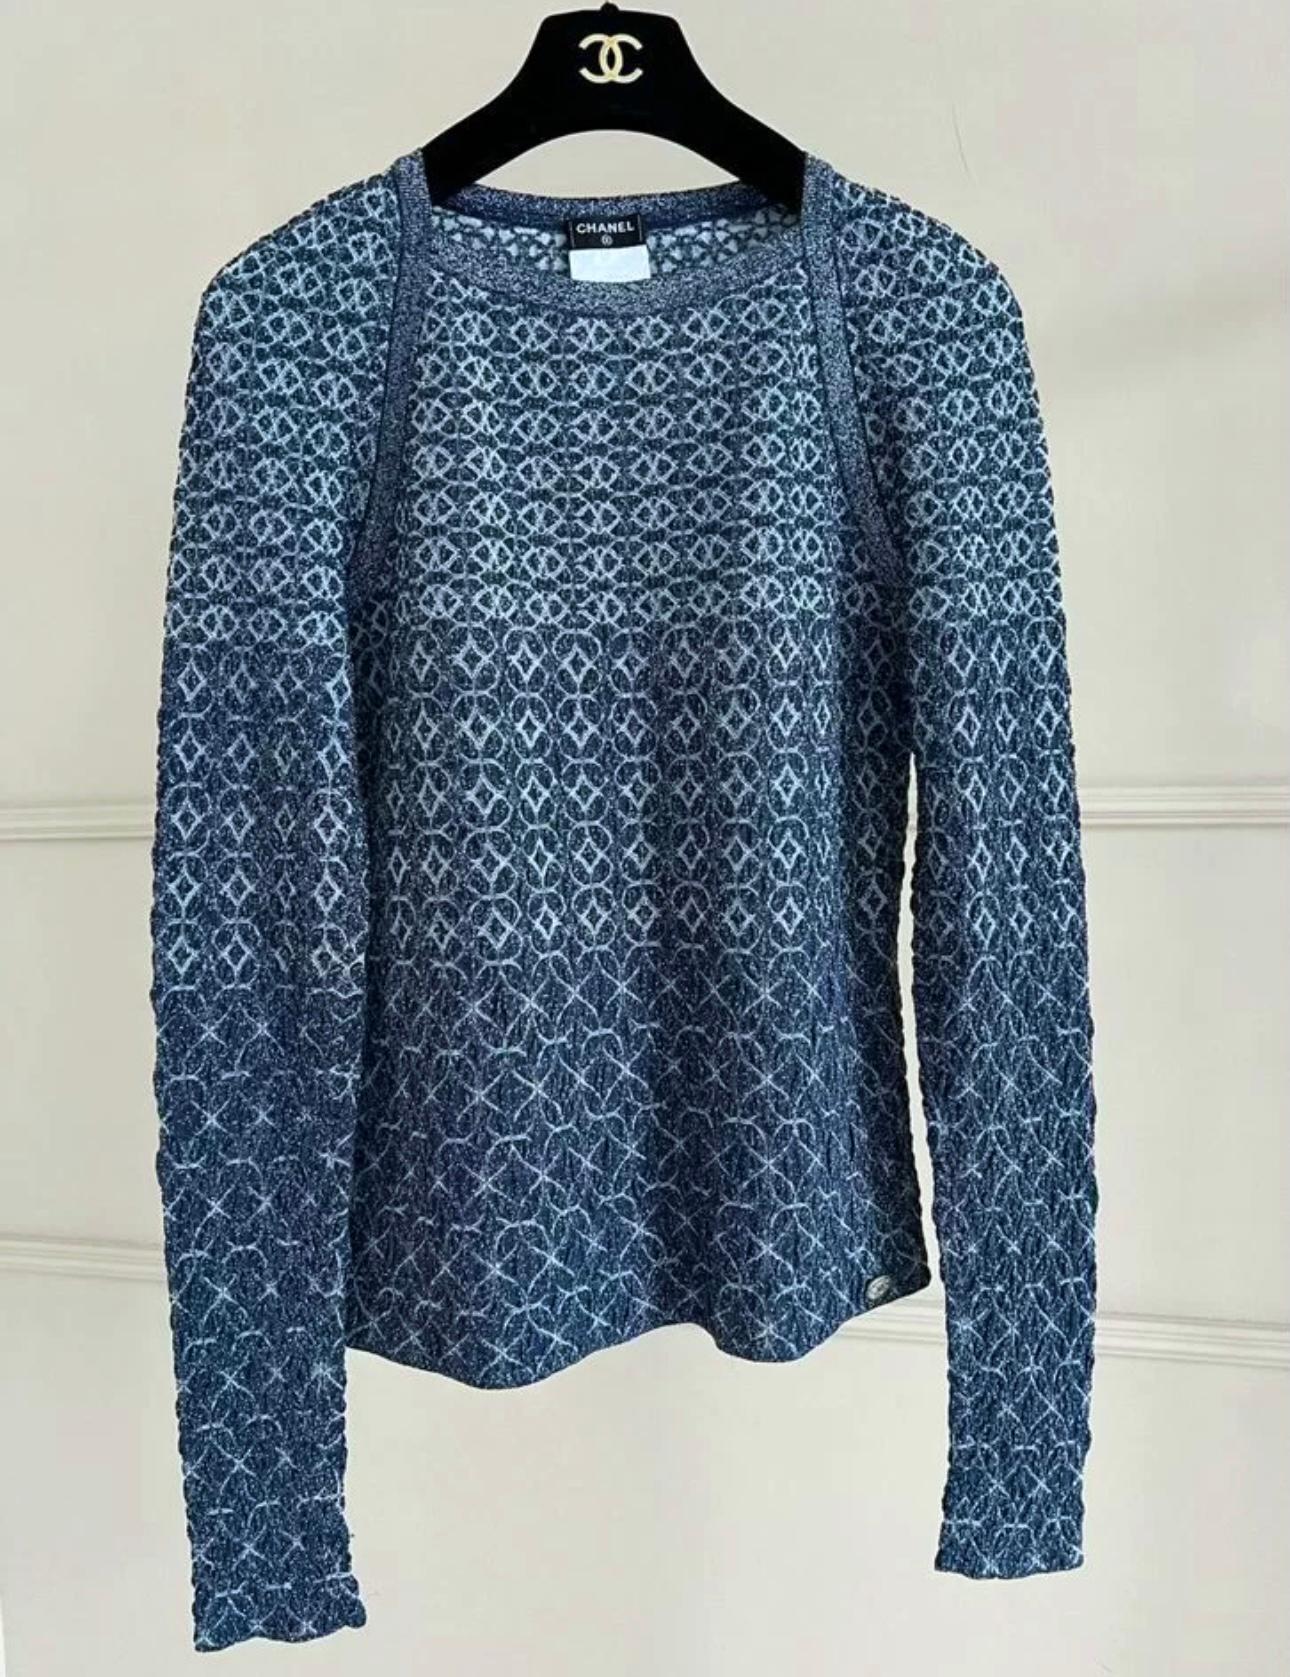 Chanel blue silk shimmering jumper with mosaic pattern from Paris / DUBAI Cruise Collection
- CC logo charm at waist
Size mark 36 FR. Condition is pristine.